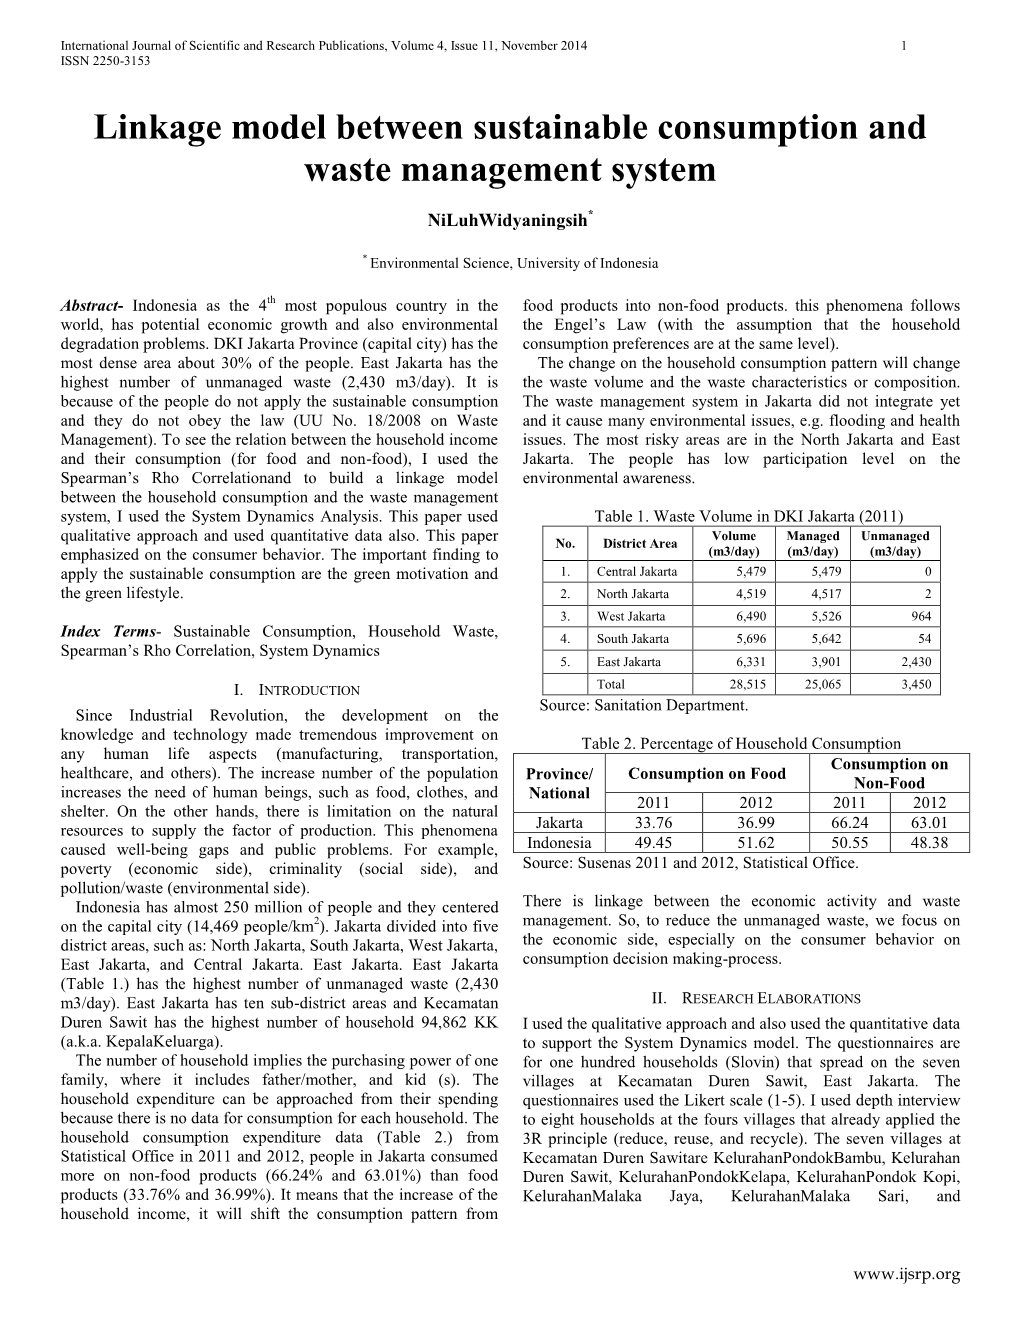 Linkage Model Between Sustainable Consumption and Waste Management System